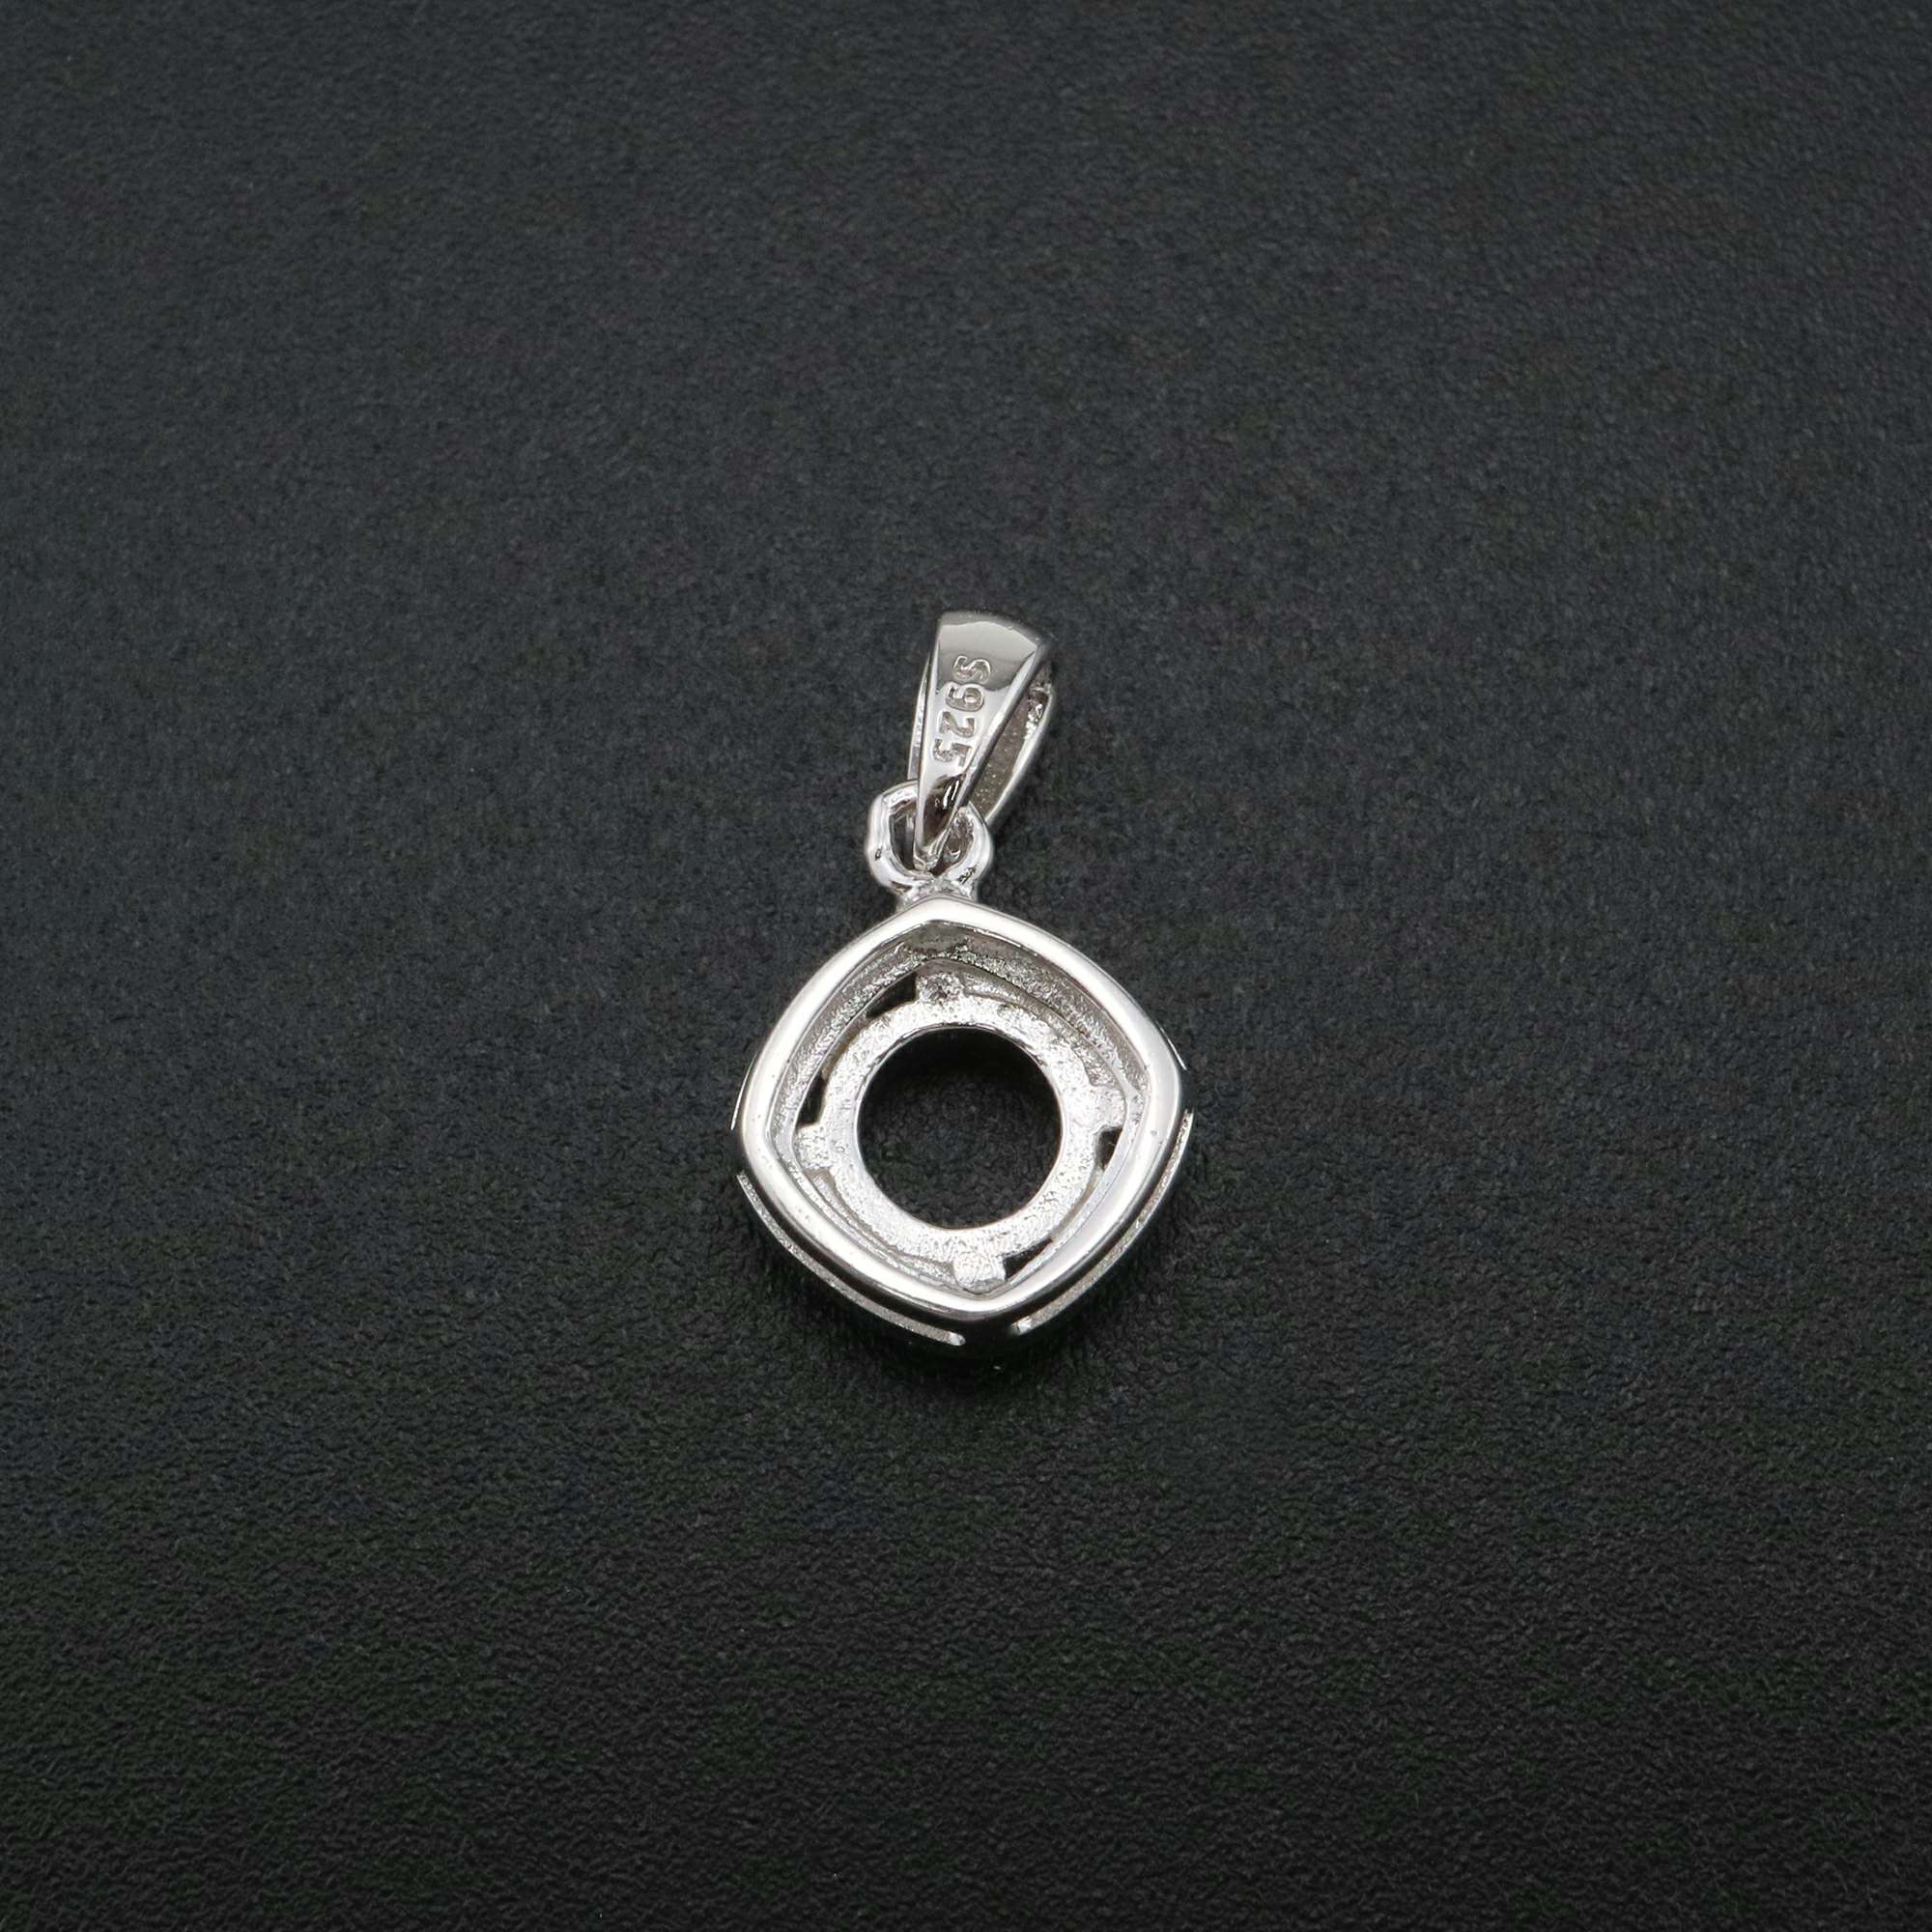 1Pcs 6.5MM Round Prong Pendant Settings Solid 925 Sterling Silver Gesmtone Charm Bezel Tray DIY Supplies 1411253 - Click Image to Close